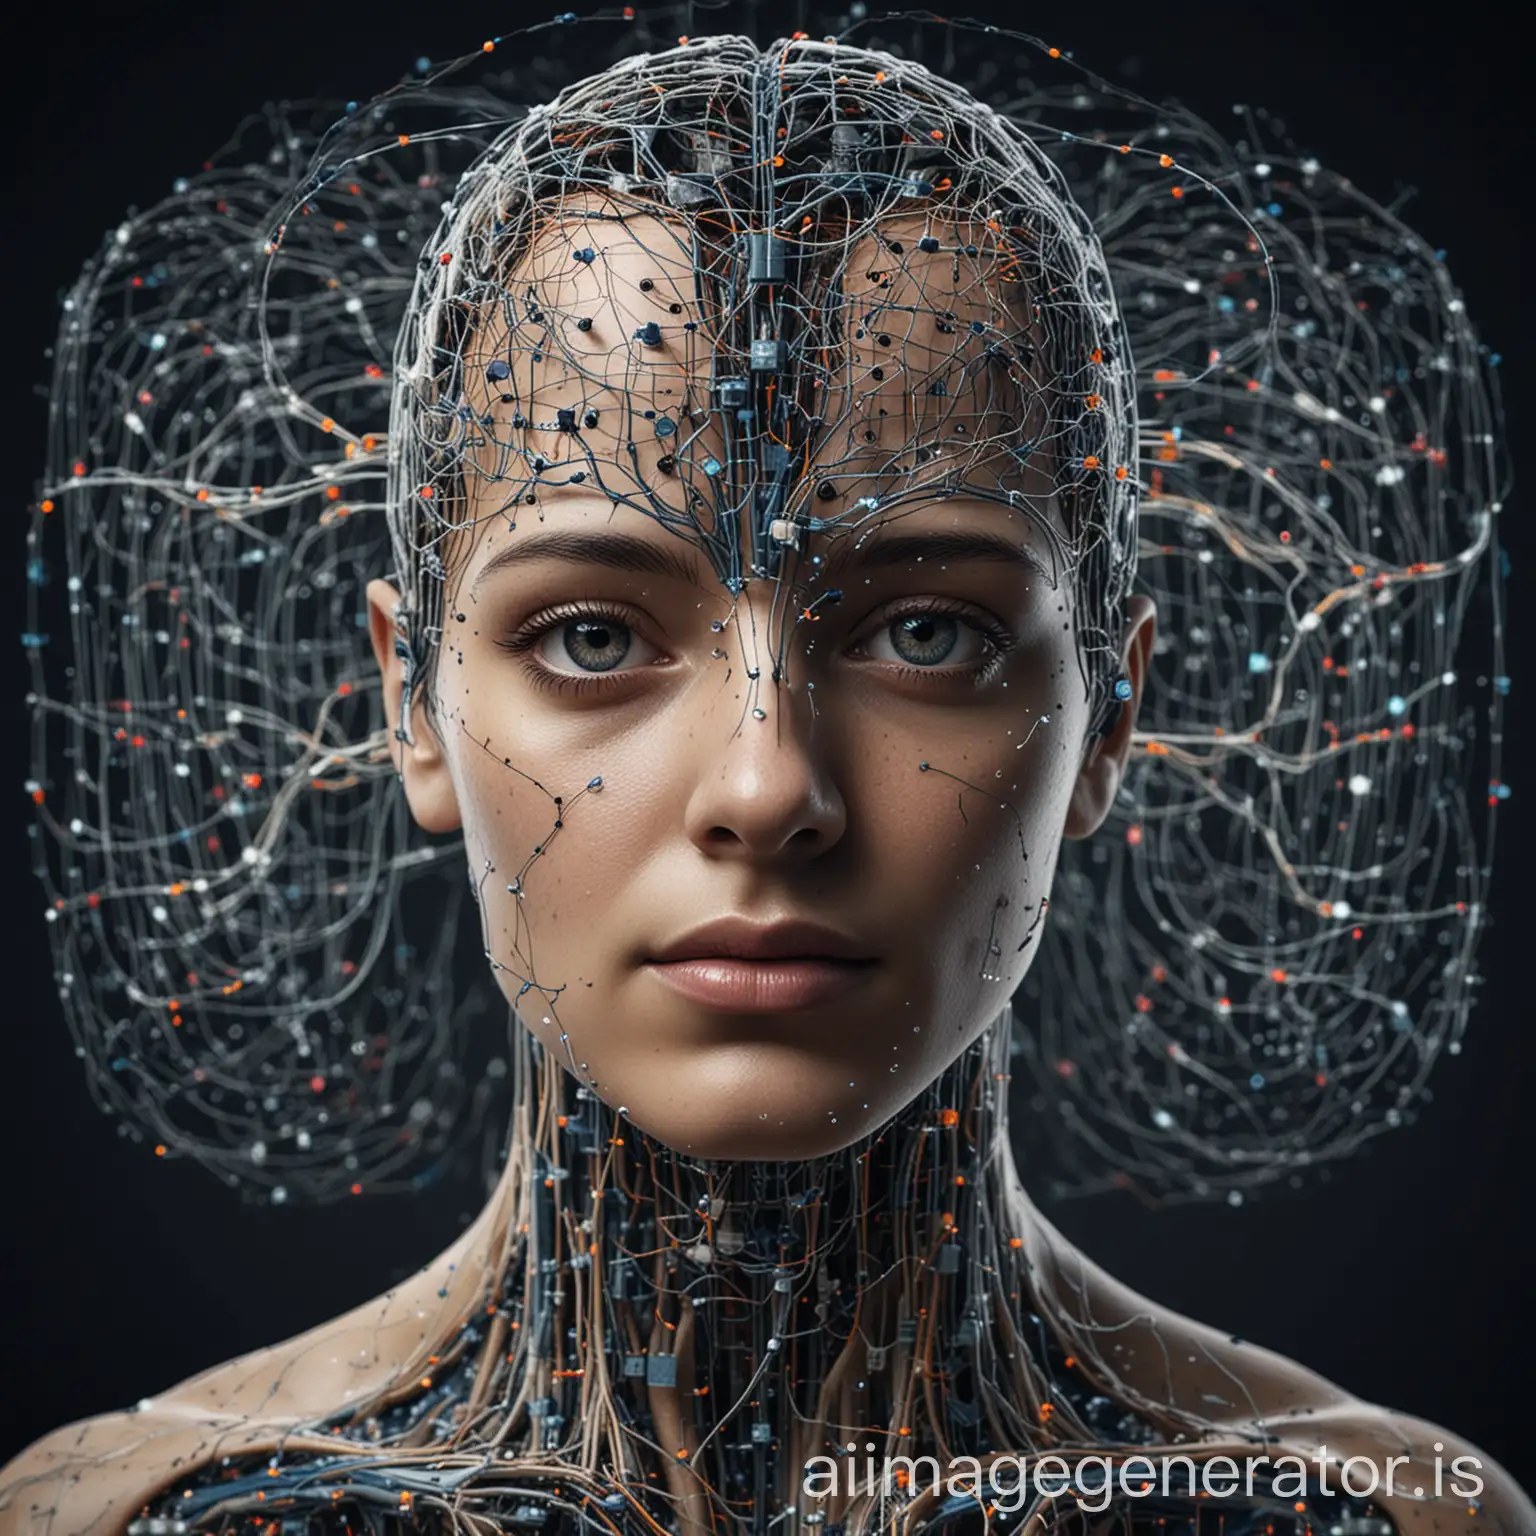 Create an image illustrating Carlos Gabriel Pérez Torres' explanation of "deep learning" in the realm of artificial intelligence, depicting neural networks and data processing.